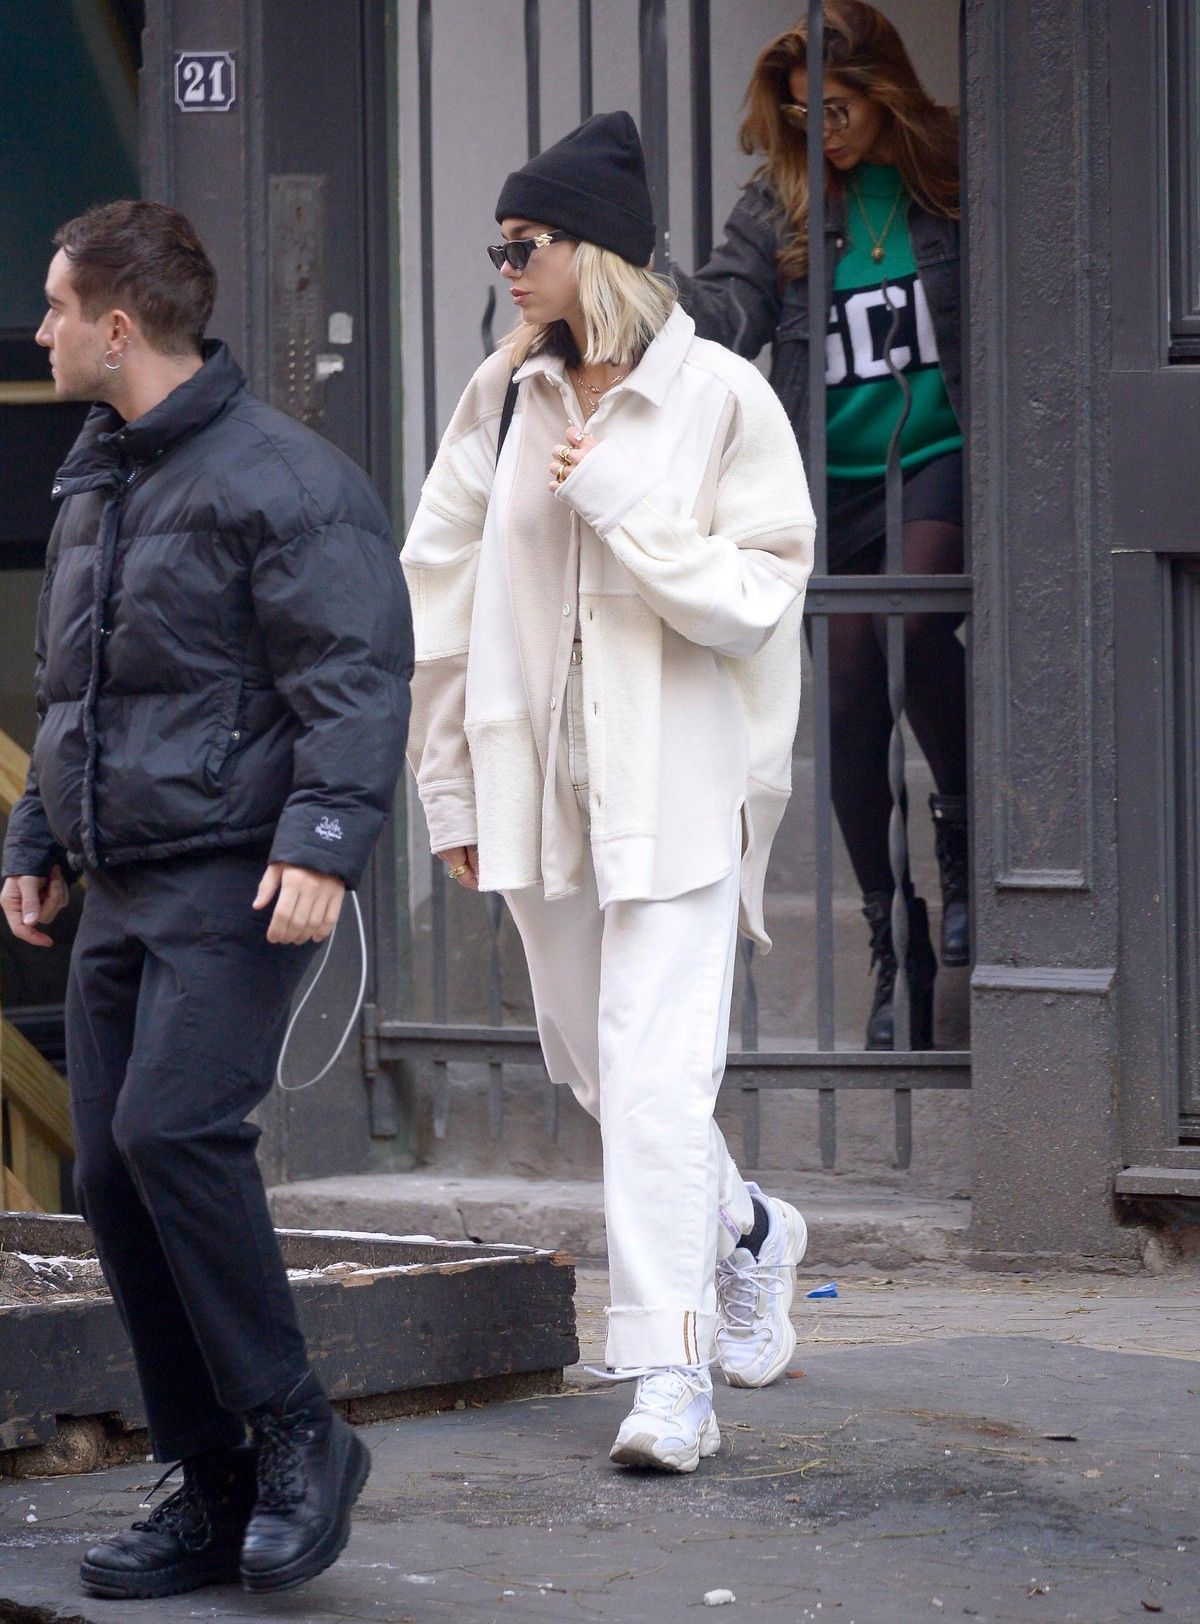 Dua Lipa in white outfit out and about in New York City 2019/12/19 - Celebskart - Dua Lipa in white outfit out and about in New York City 2019/12/19 - Celebskart -   17 dua lipa style Street ideas